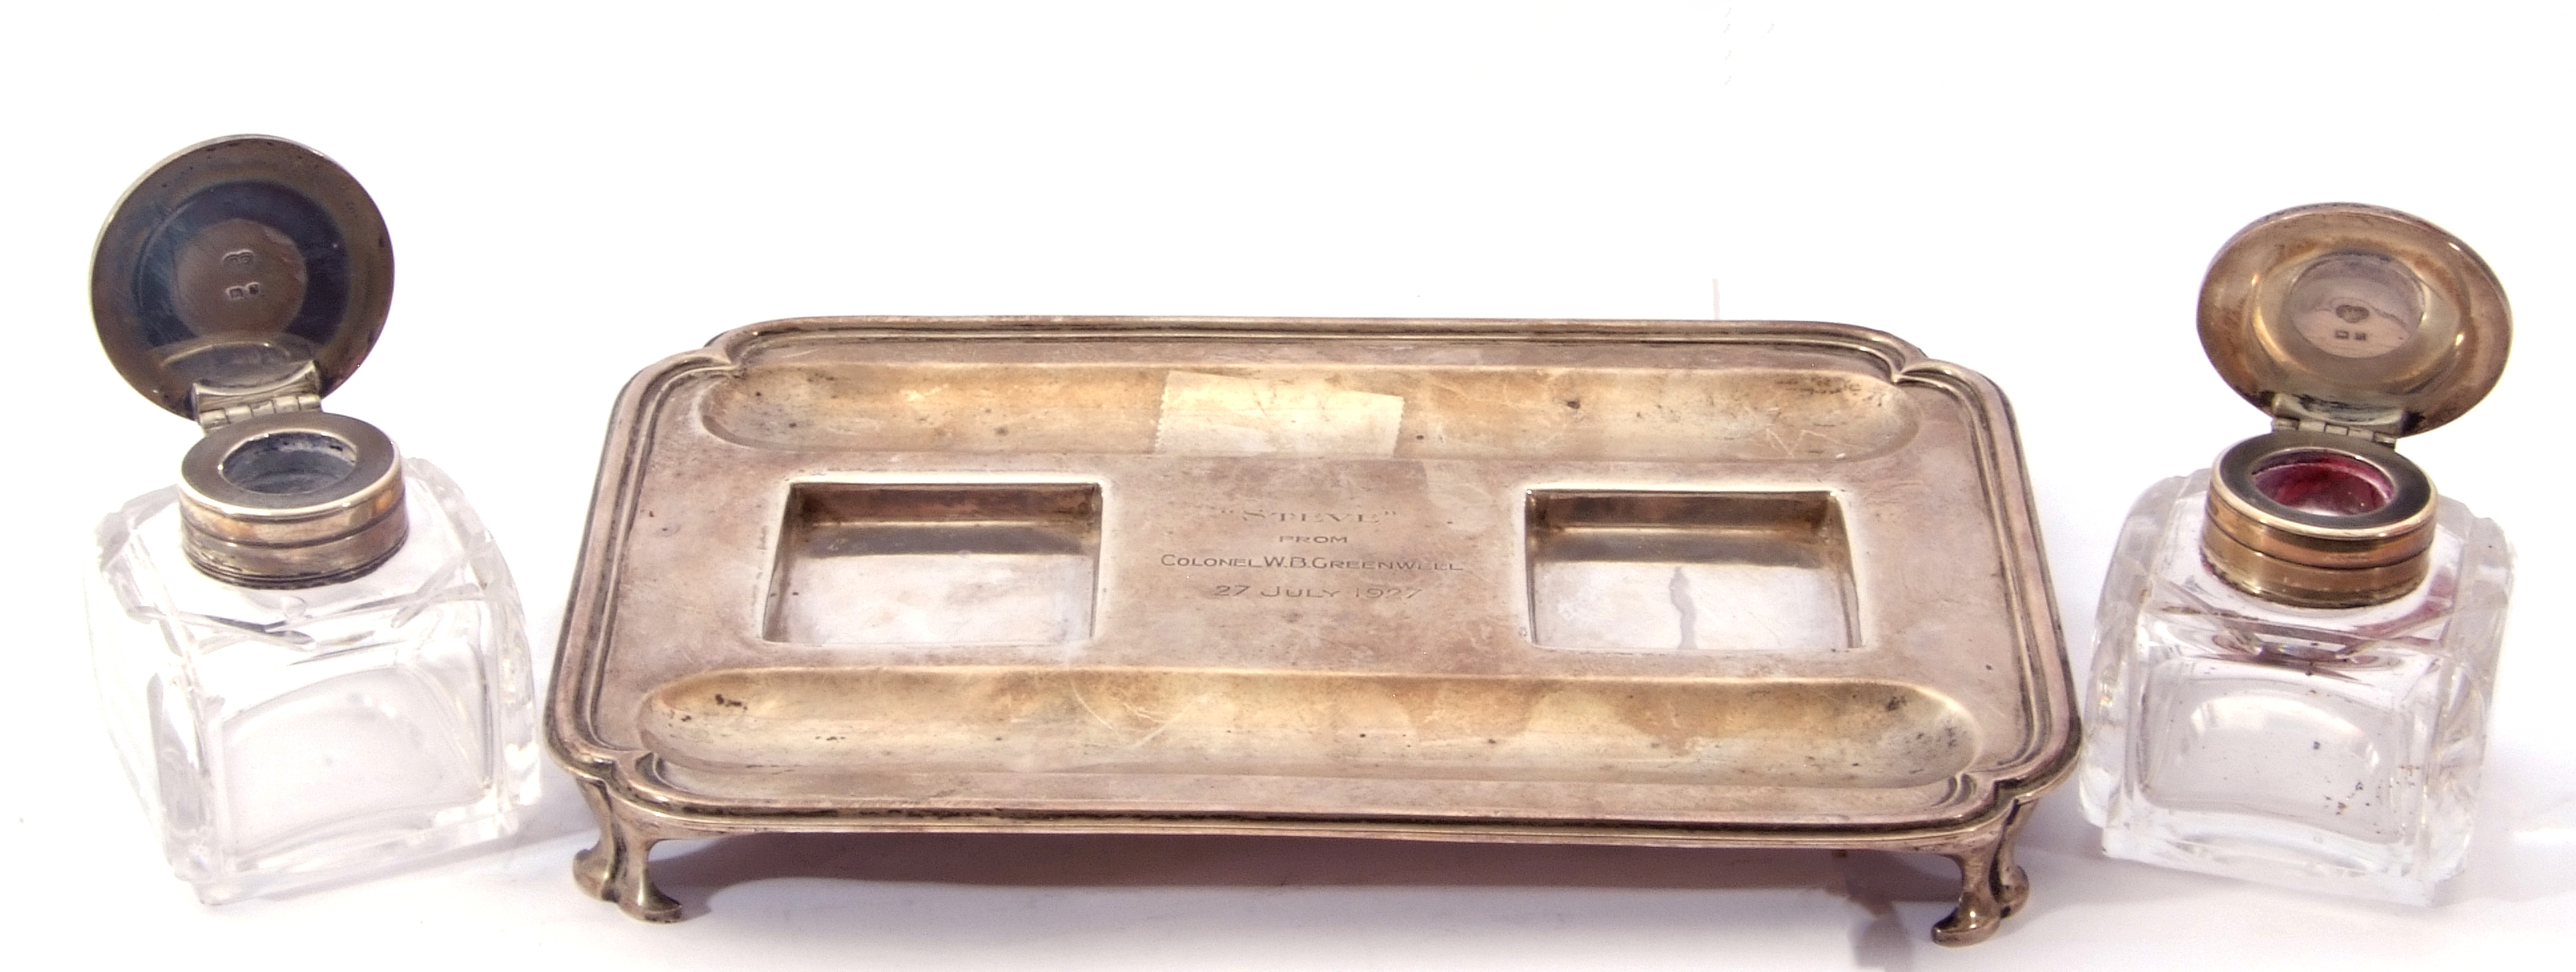 Early 20th Century ink and pen stand of shaped rectangular form, having two glass ink wells with - Image 3 of 4